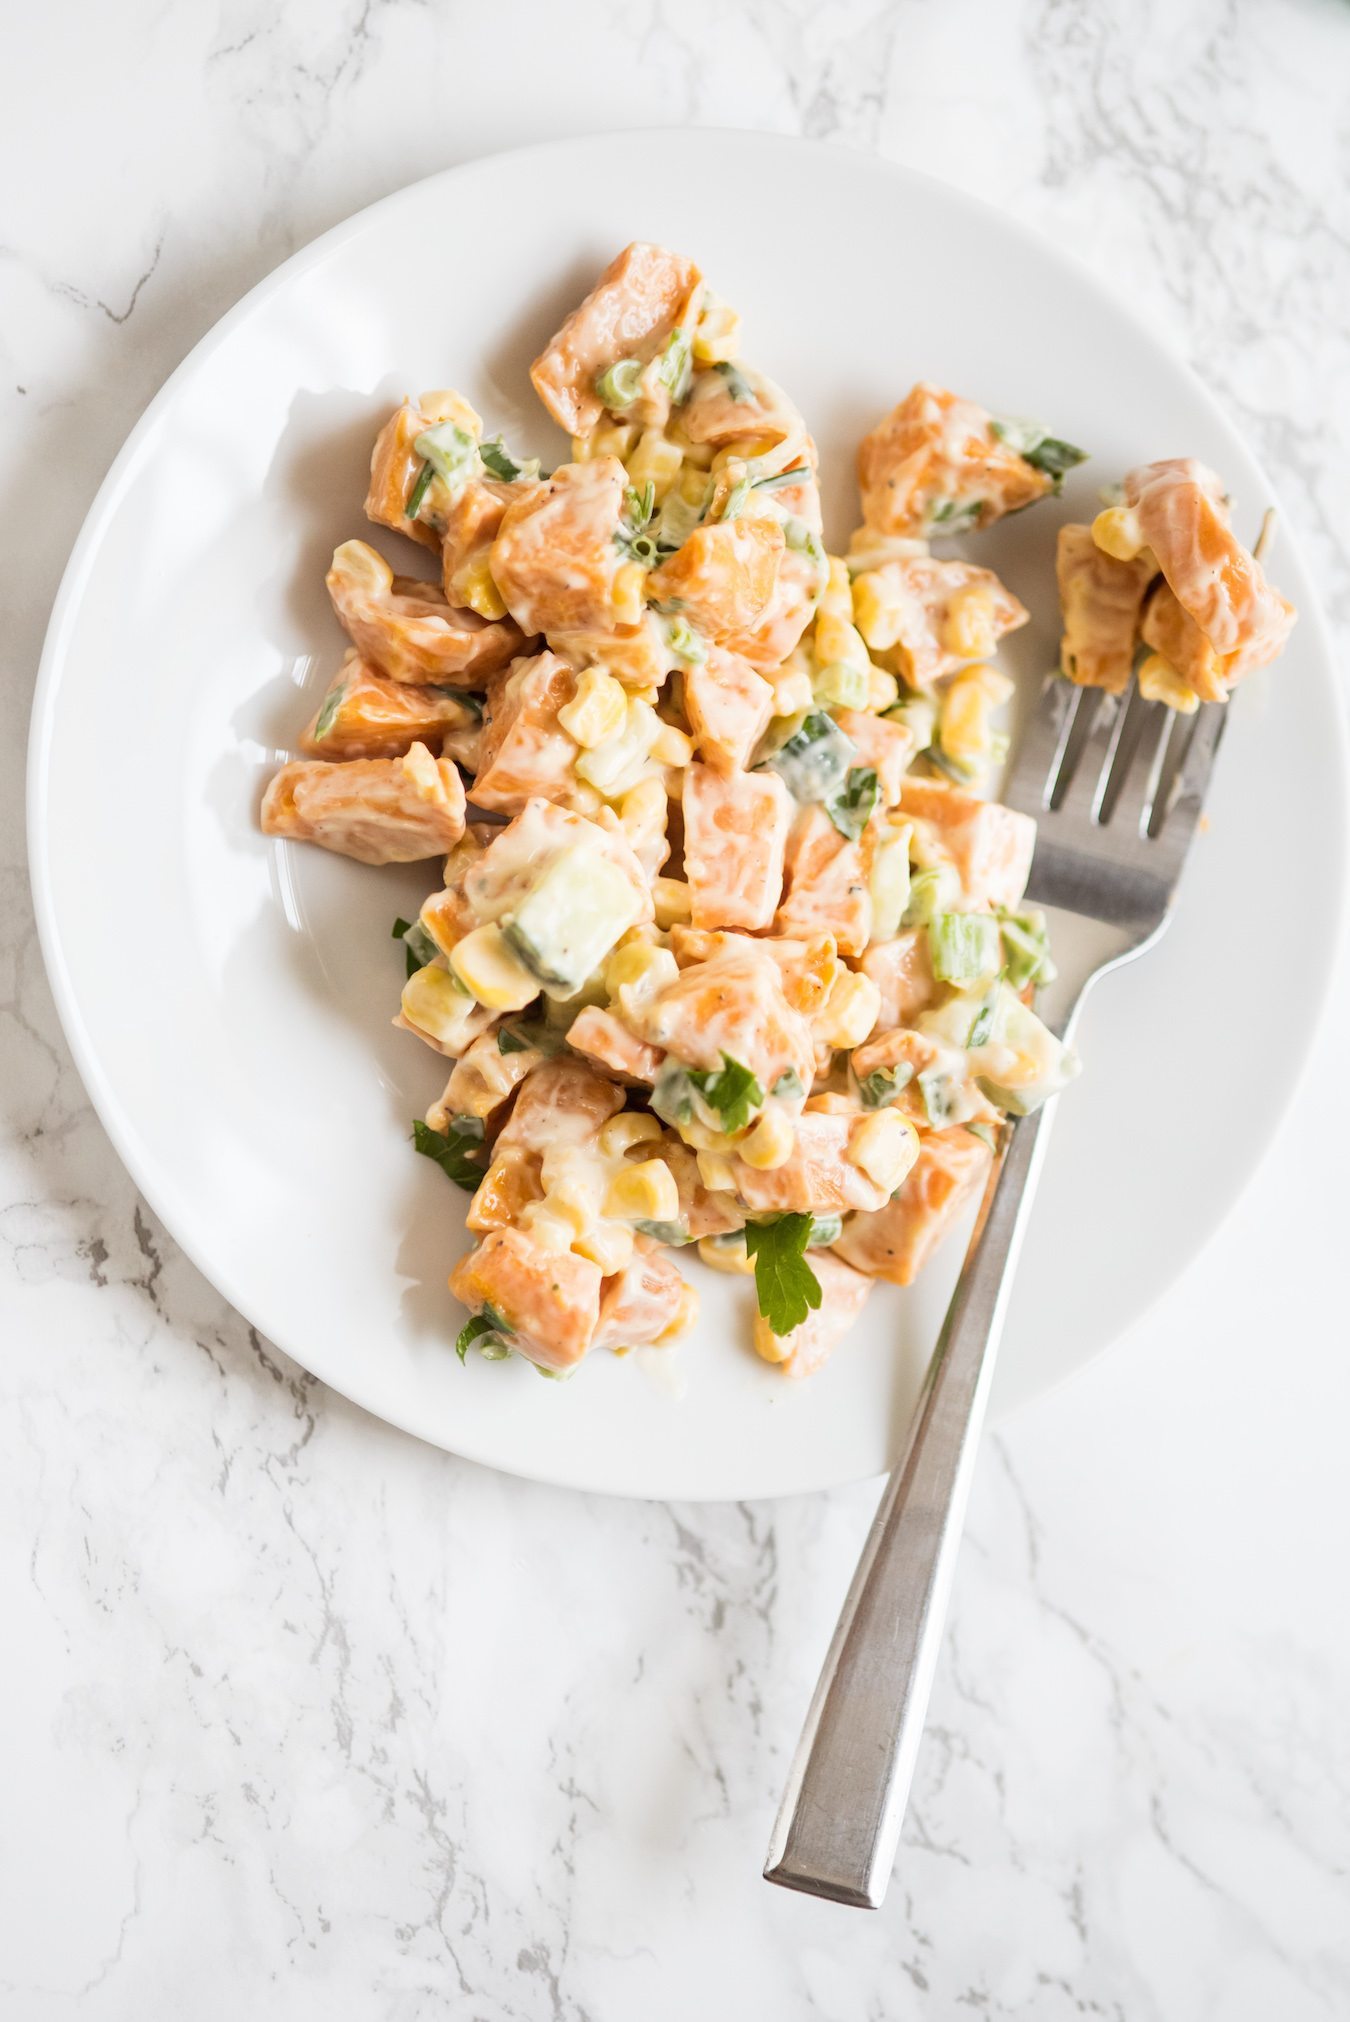 Roasted Sweet Potato Salad | Summer recipes, entertaining tips, party ideas and more from @cydconverse